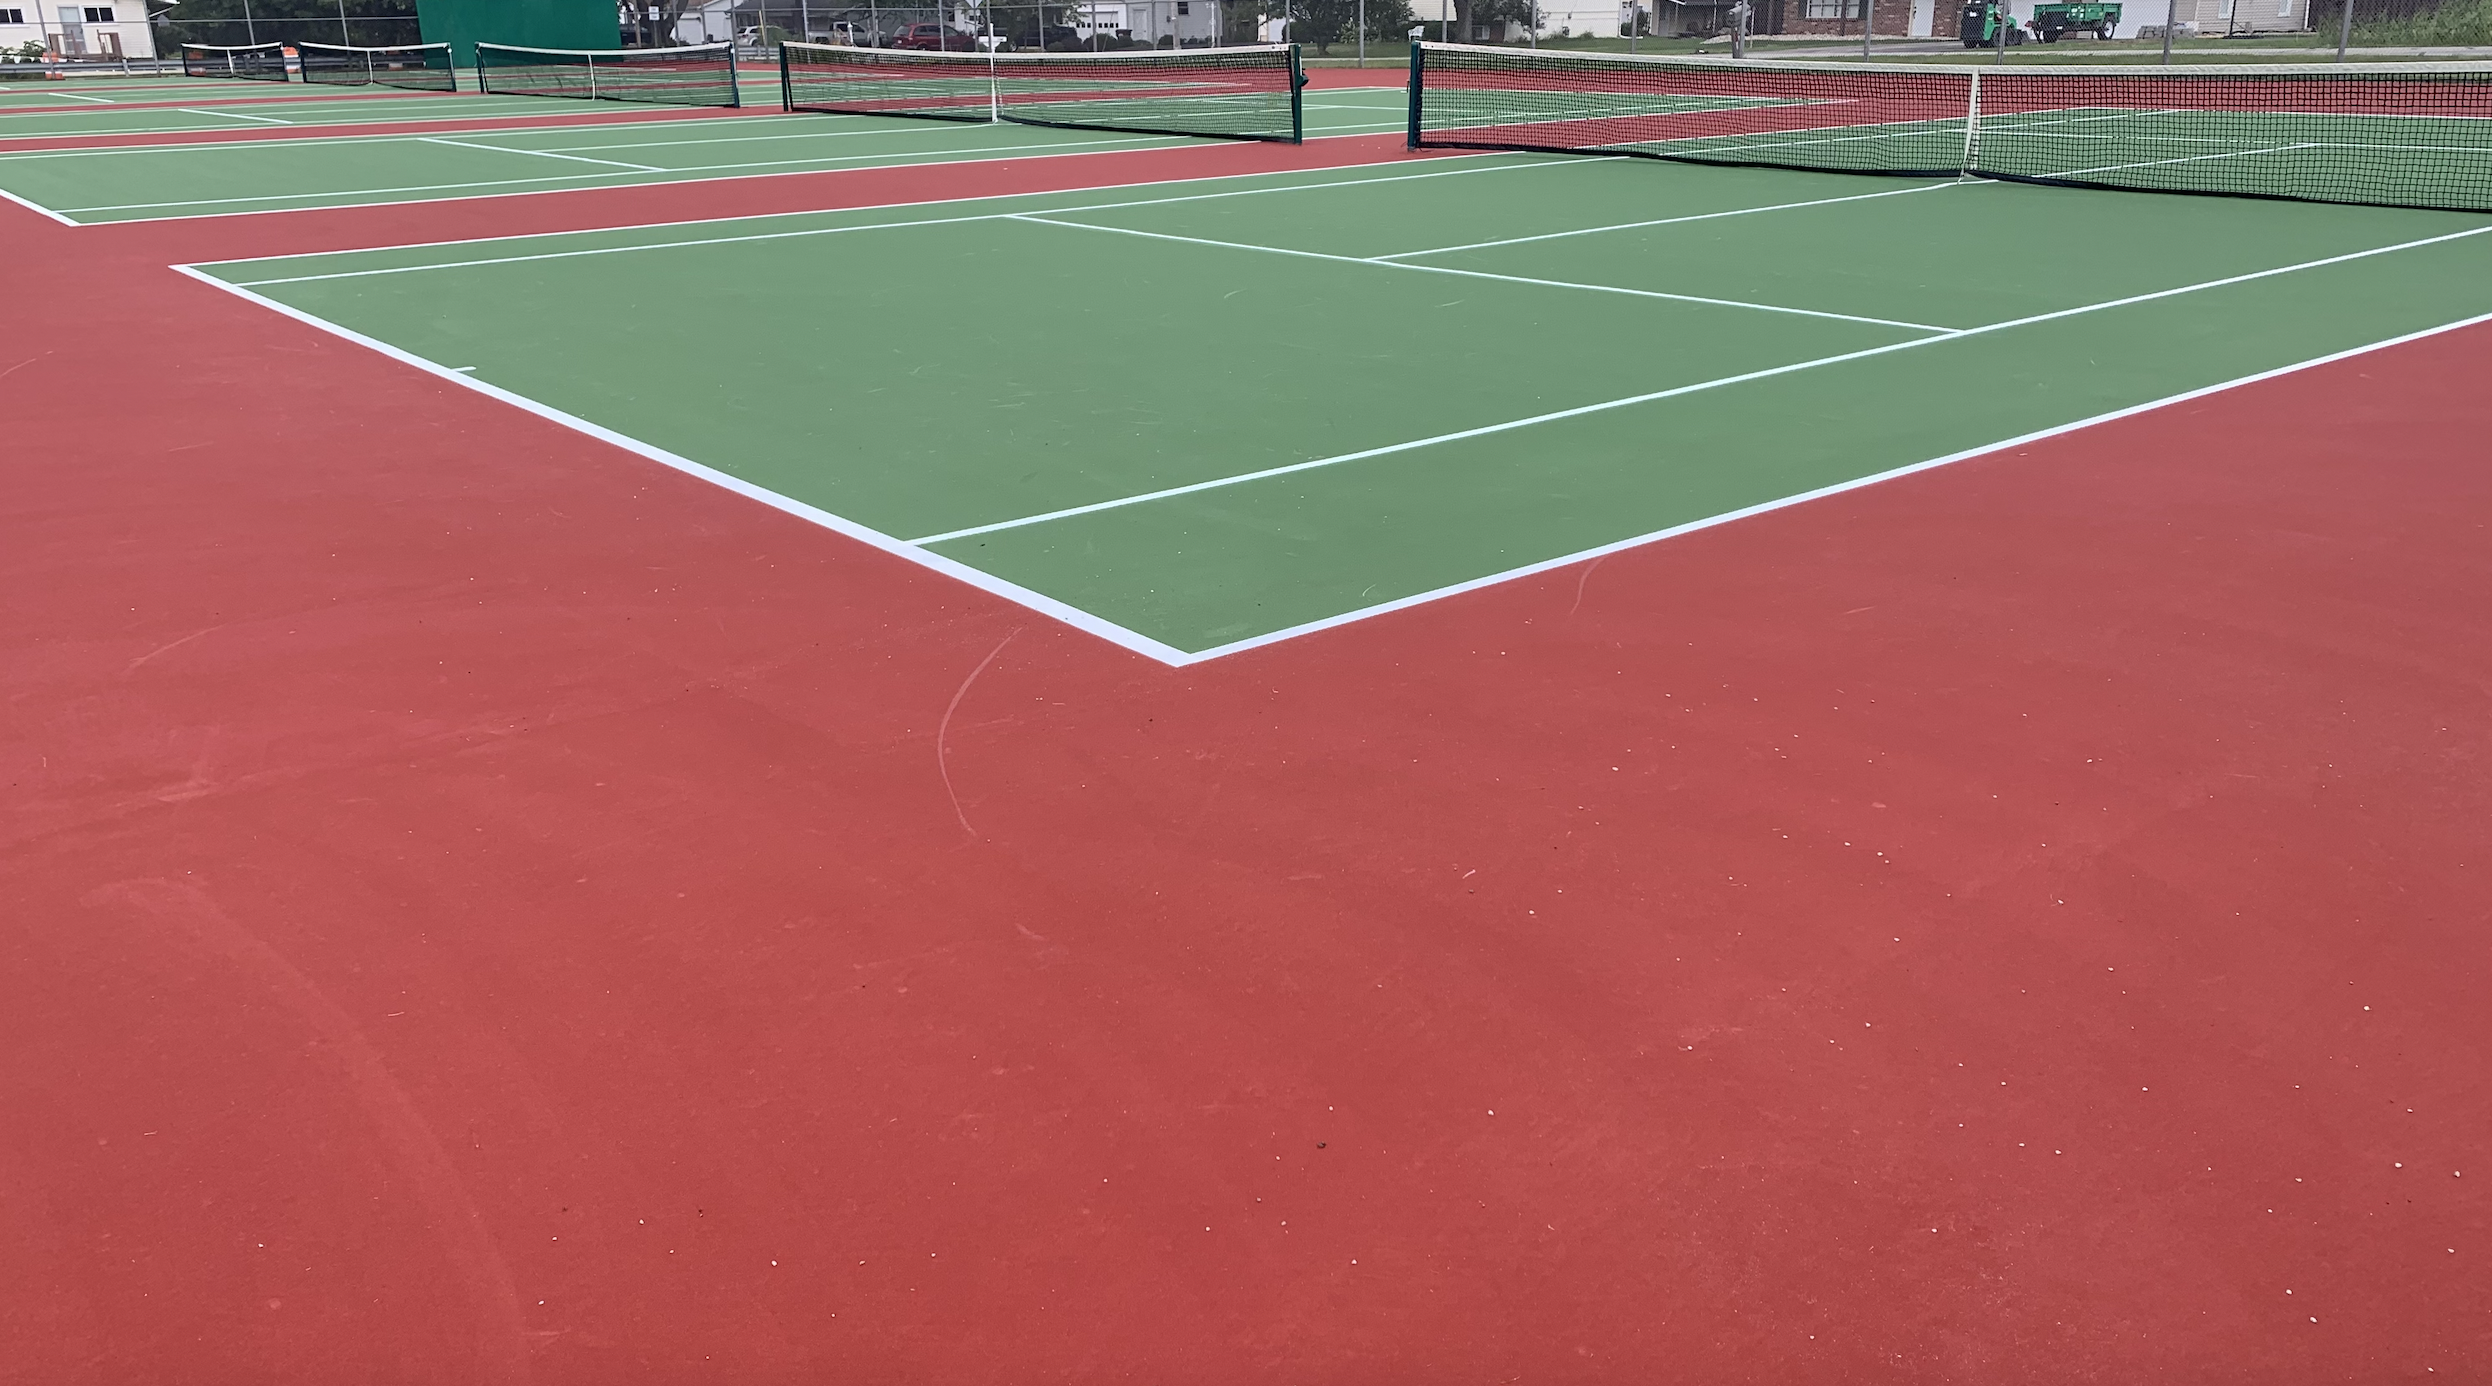 close-up view of new tennis court